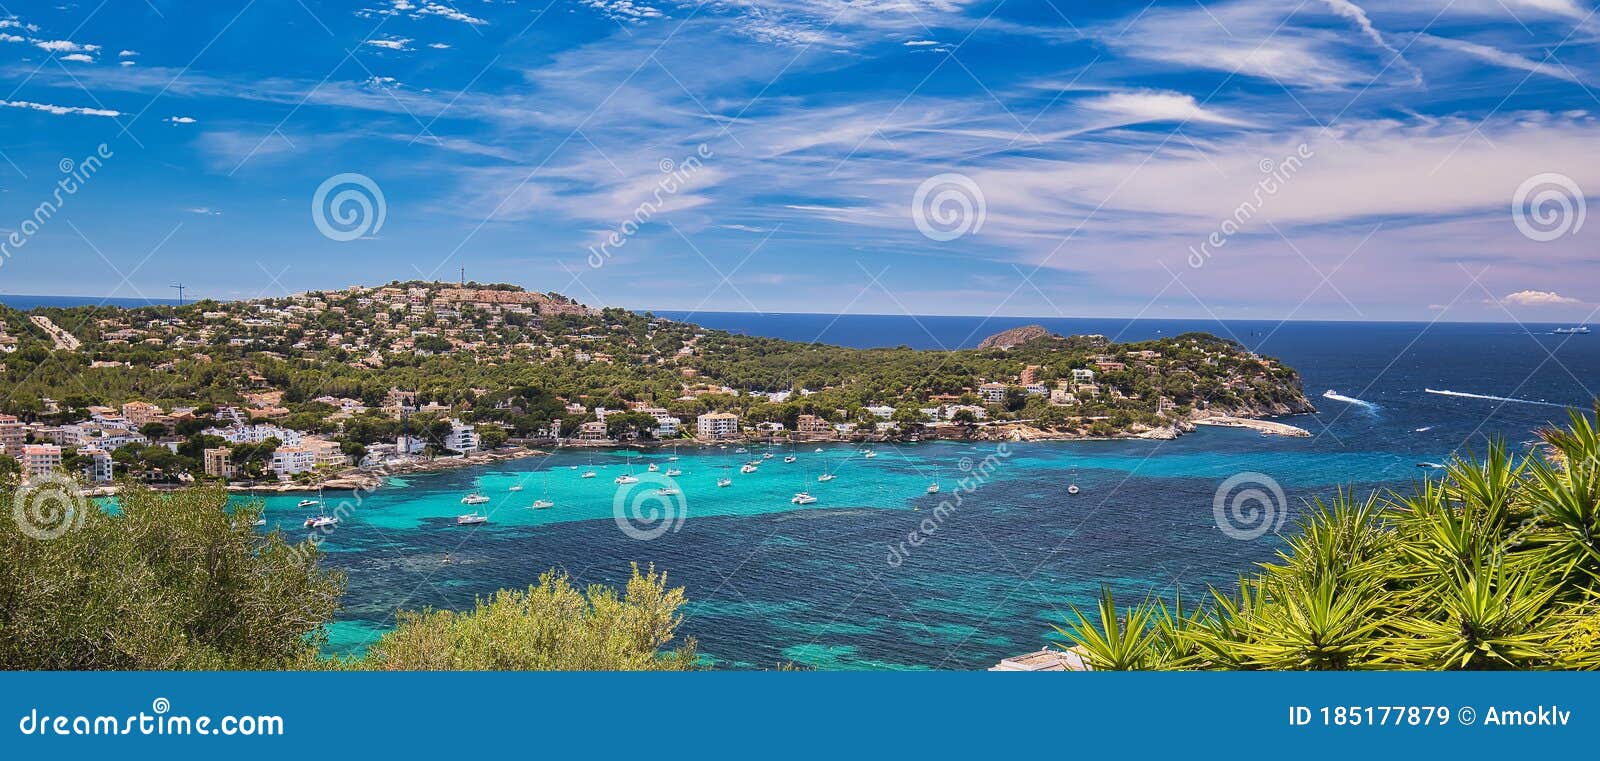 panoramic image coastline of santa ponsa town in the south-west of majorca island